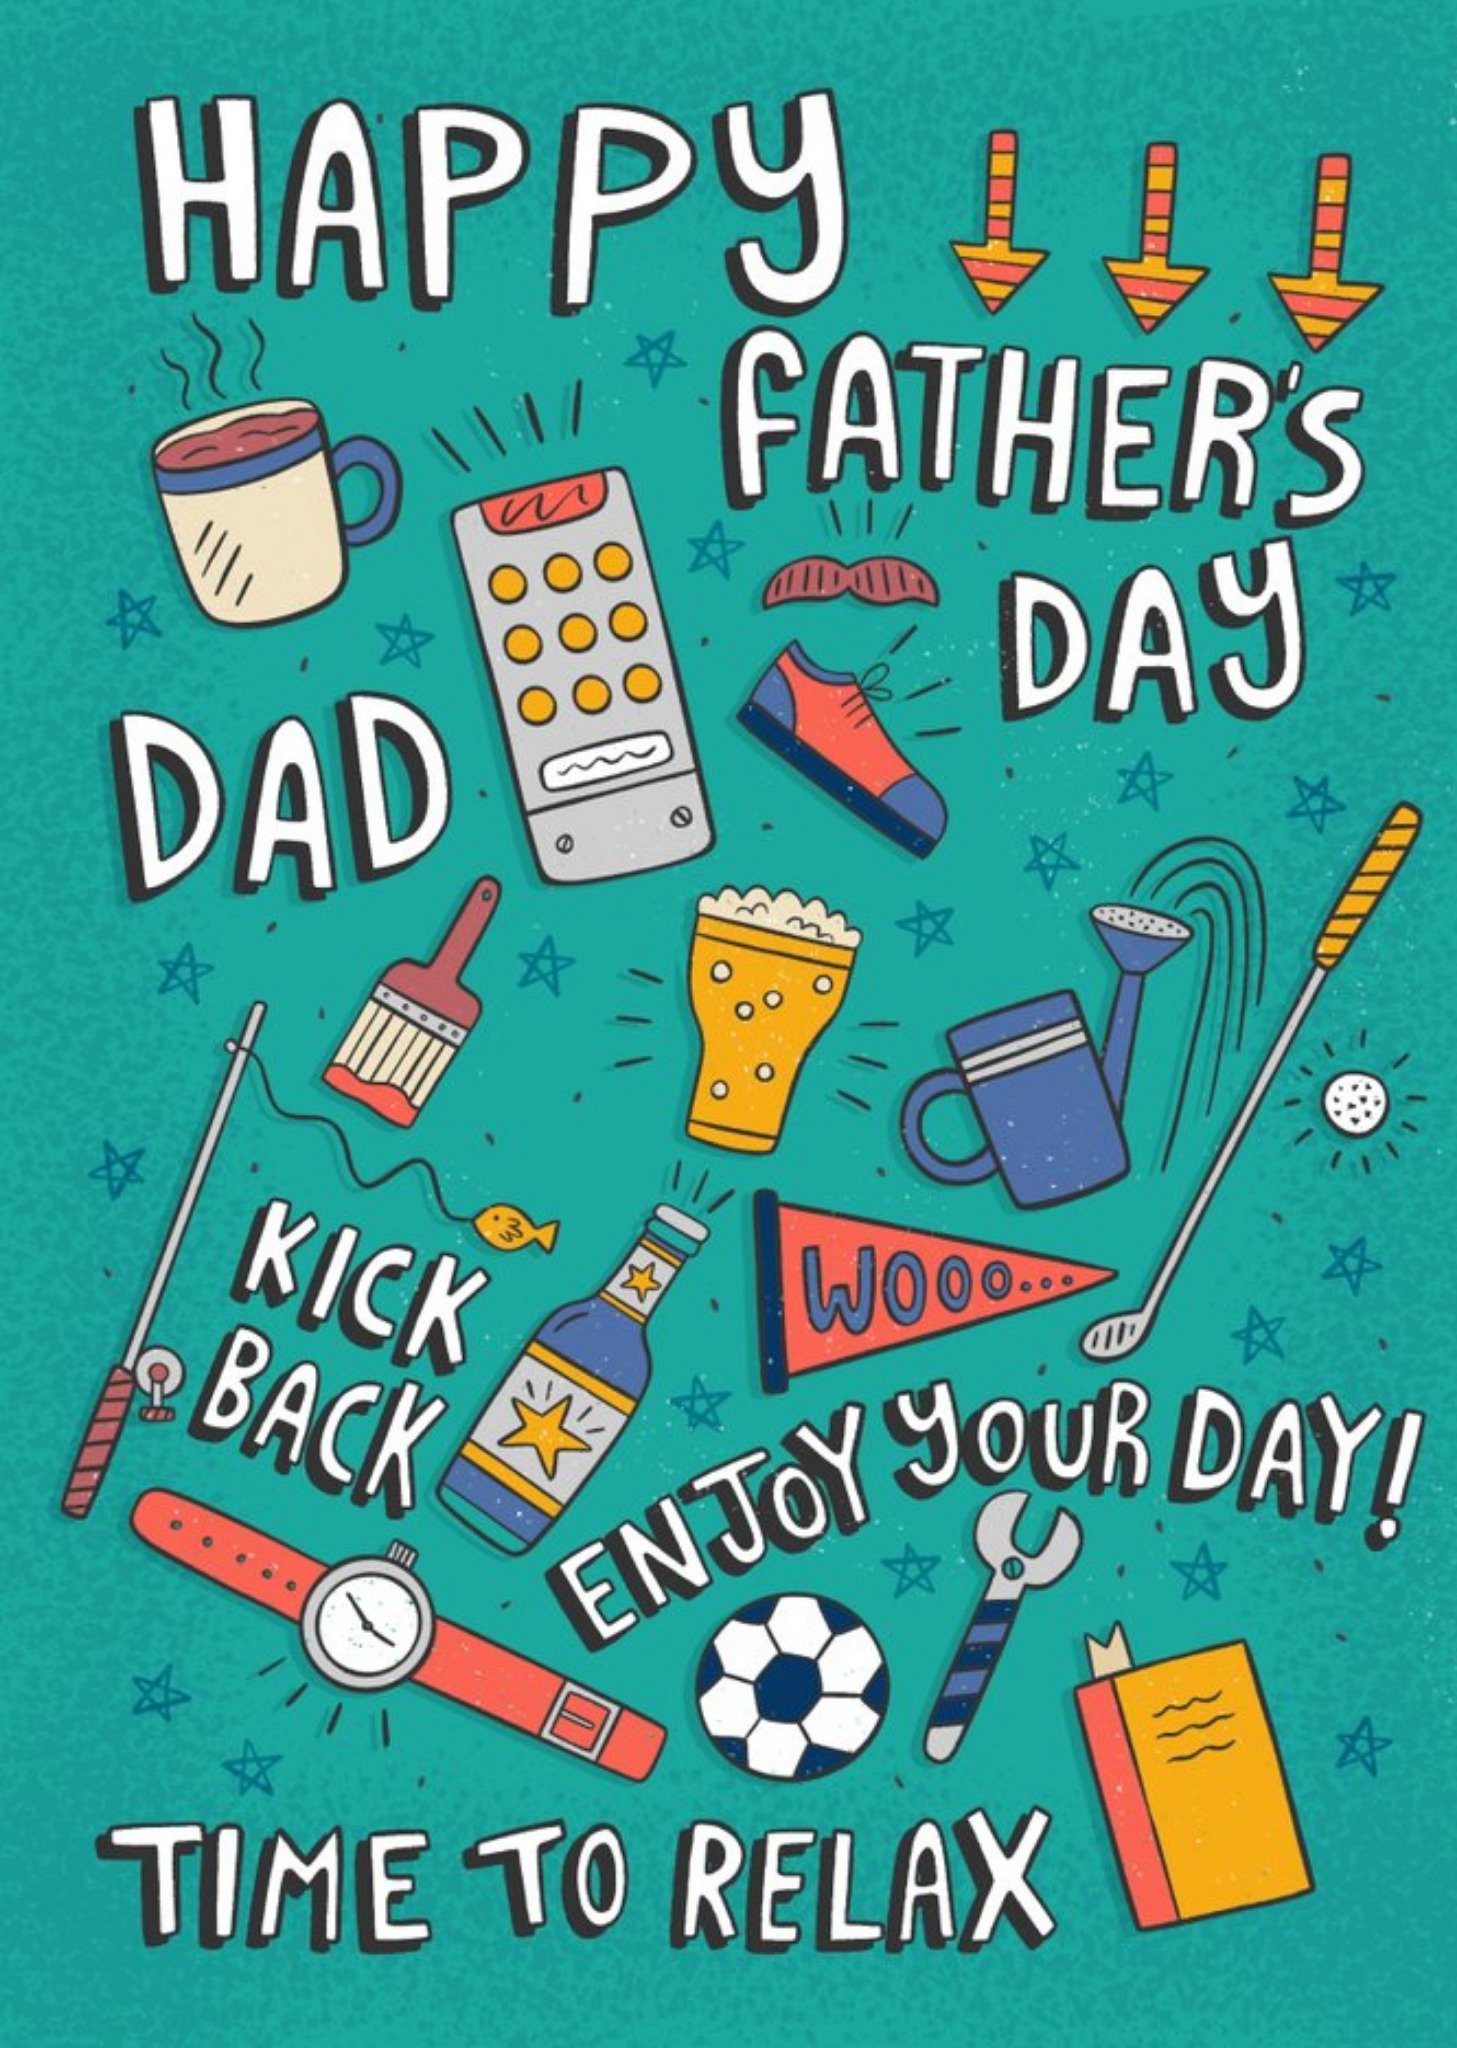 Moonpig Cute Illustrations Happy Fathers Day Kick Back Enjoy Your Day Time To Relax Card, Large